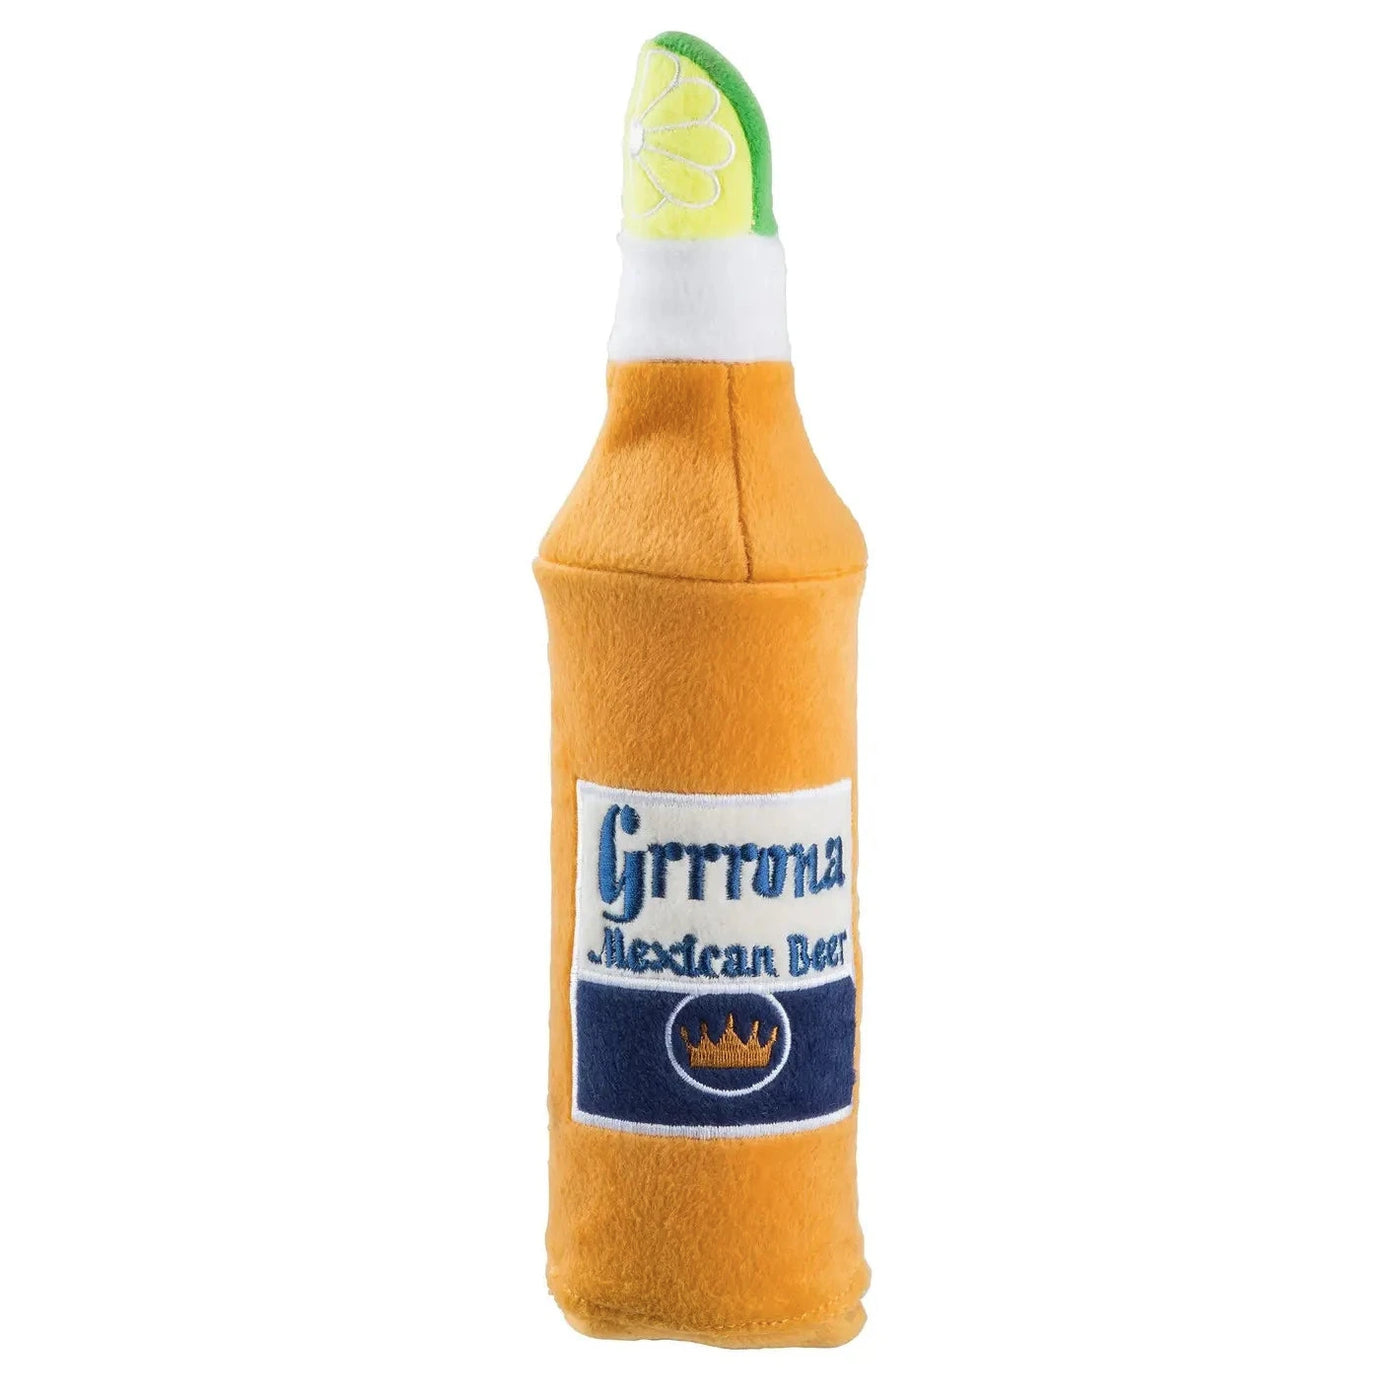 A dog toy shaped and designed to look like a Corona beer bottle with a slice of lime.